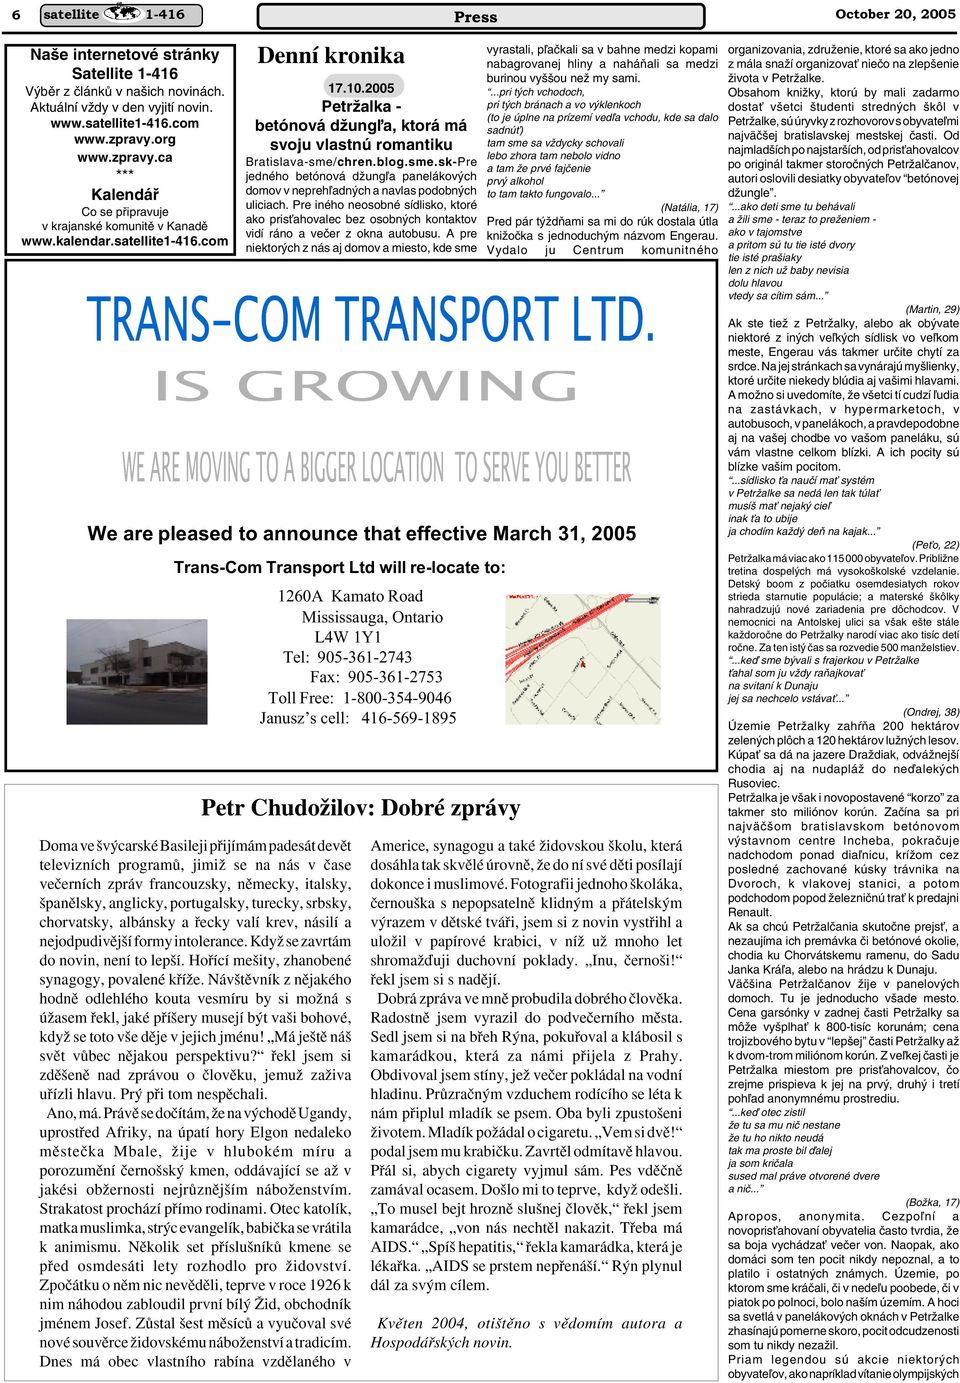 IS GROWING WE ARE MOVING TO A BIGGER LOCATION TO SERVE YOU BETTER We are pleased to announce that effective March 31, 2005 Trans-Com Transport Ltd will re-locate to: 1260A Kamato Road Mississauga,